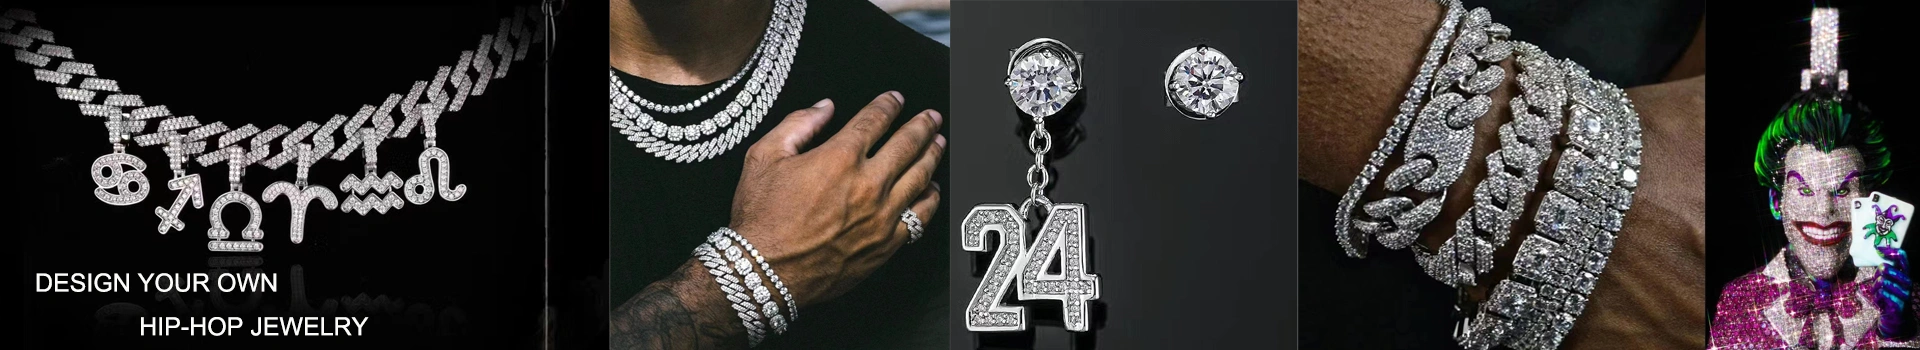 Deisgn Your Own Hip-Hop Jewelry